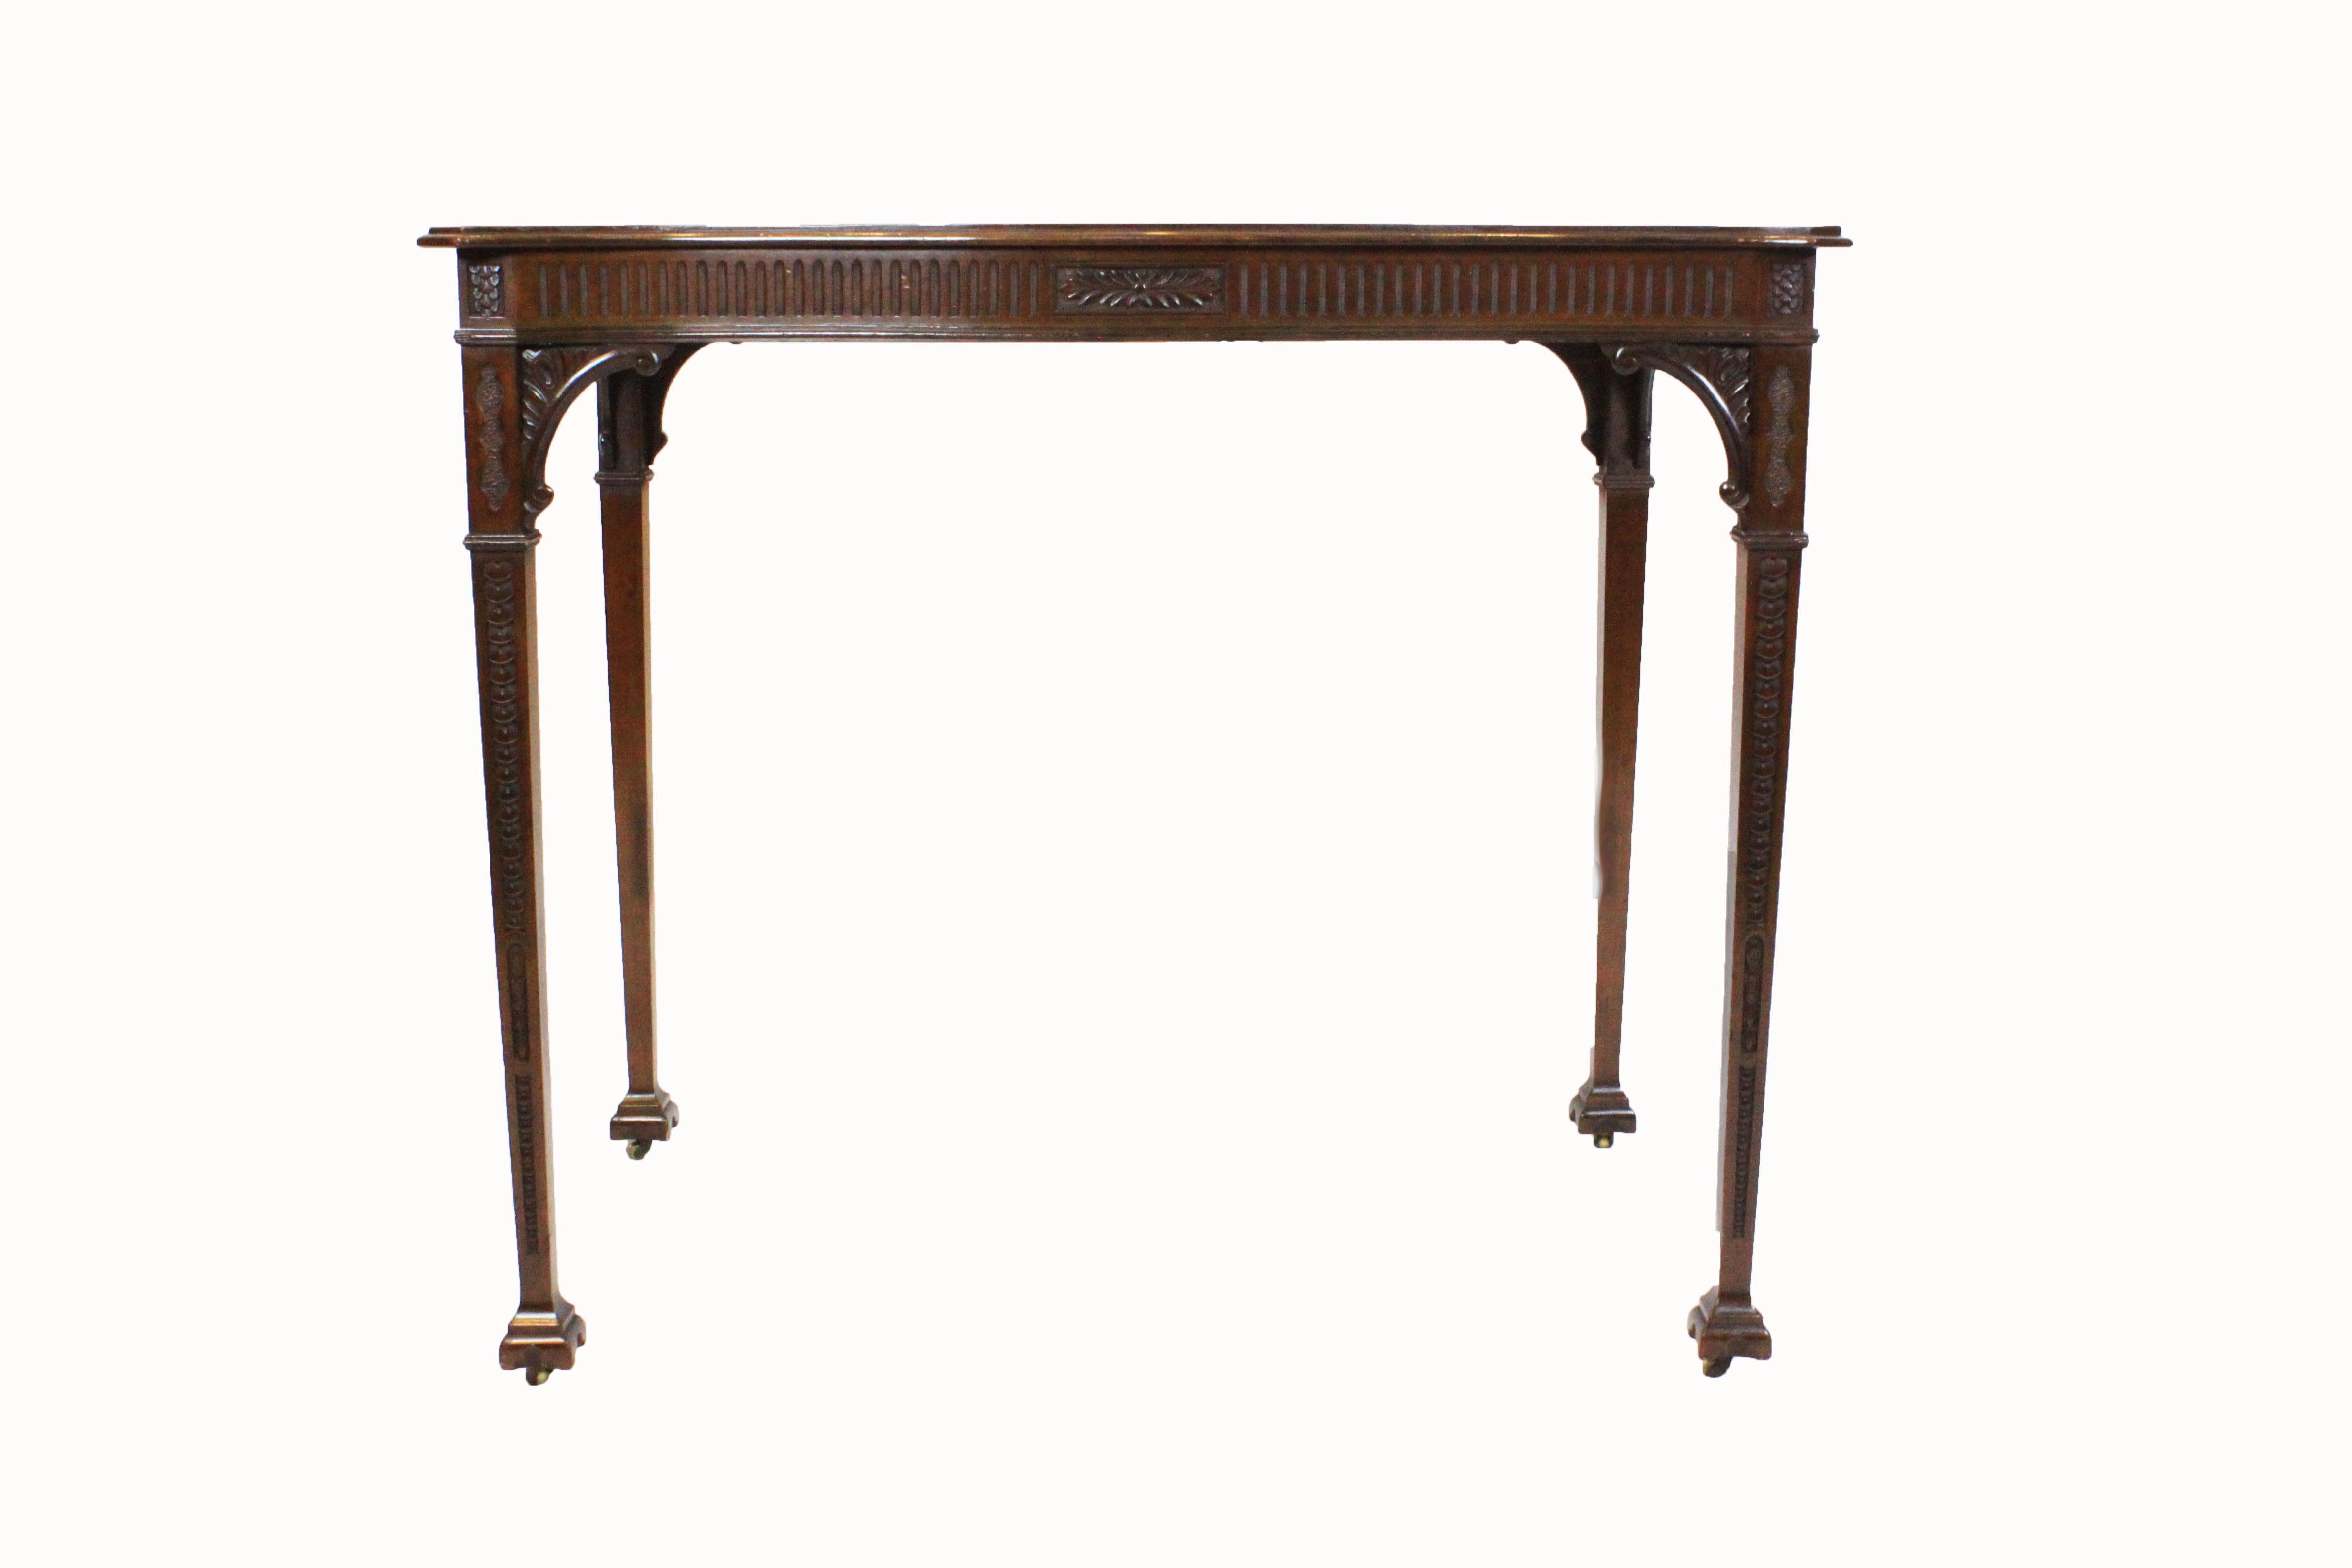 Serpentine silver table of Adam influence with solid mahogany figured top with lipped and moulded edge over fluted and carved frieze having a central carved rosette. Standing on finely carved, tapered legs with acanthus leaf carved corner brackets